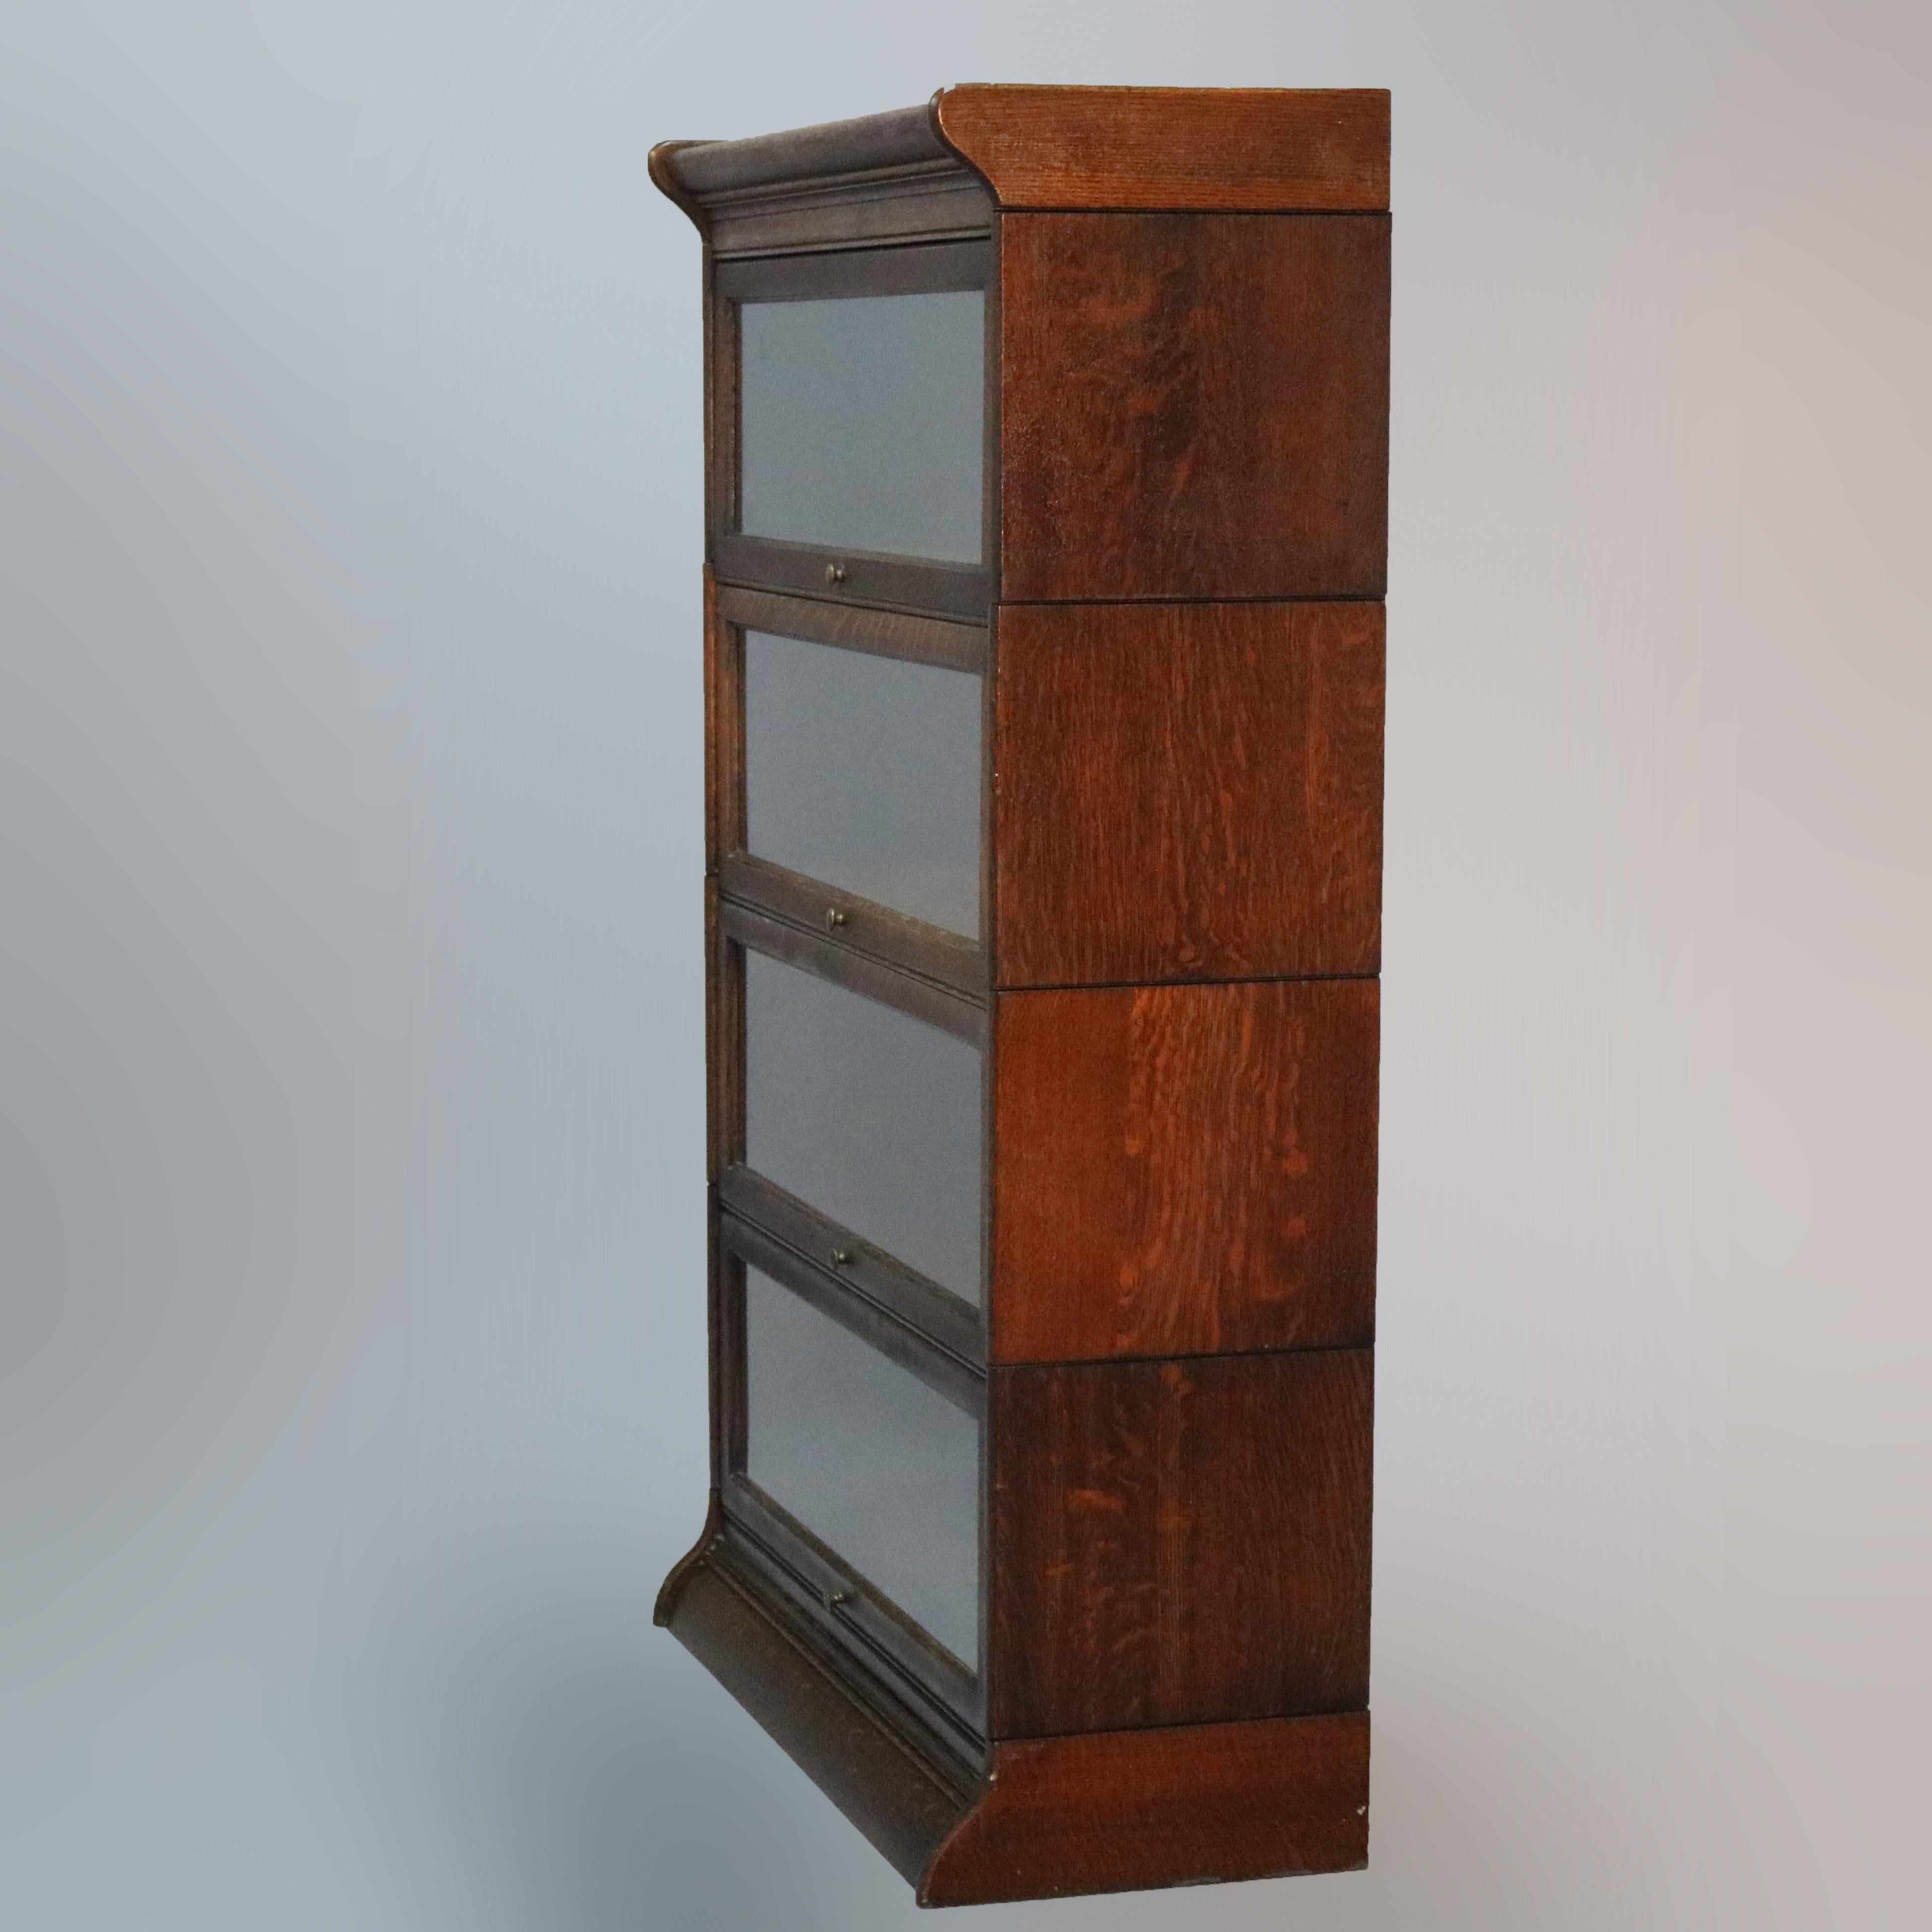 An antique Arts & Crafts Barrister bookcase by Gunn of Grand Rapids, Michigan offers quarter sawn oak construction with four stacks having pull out glass doors, seated on shaped base, original labels and maker stamp as photographed, circa